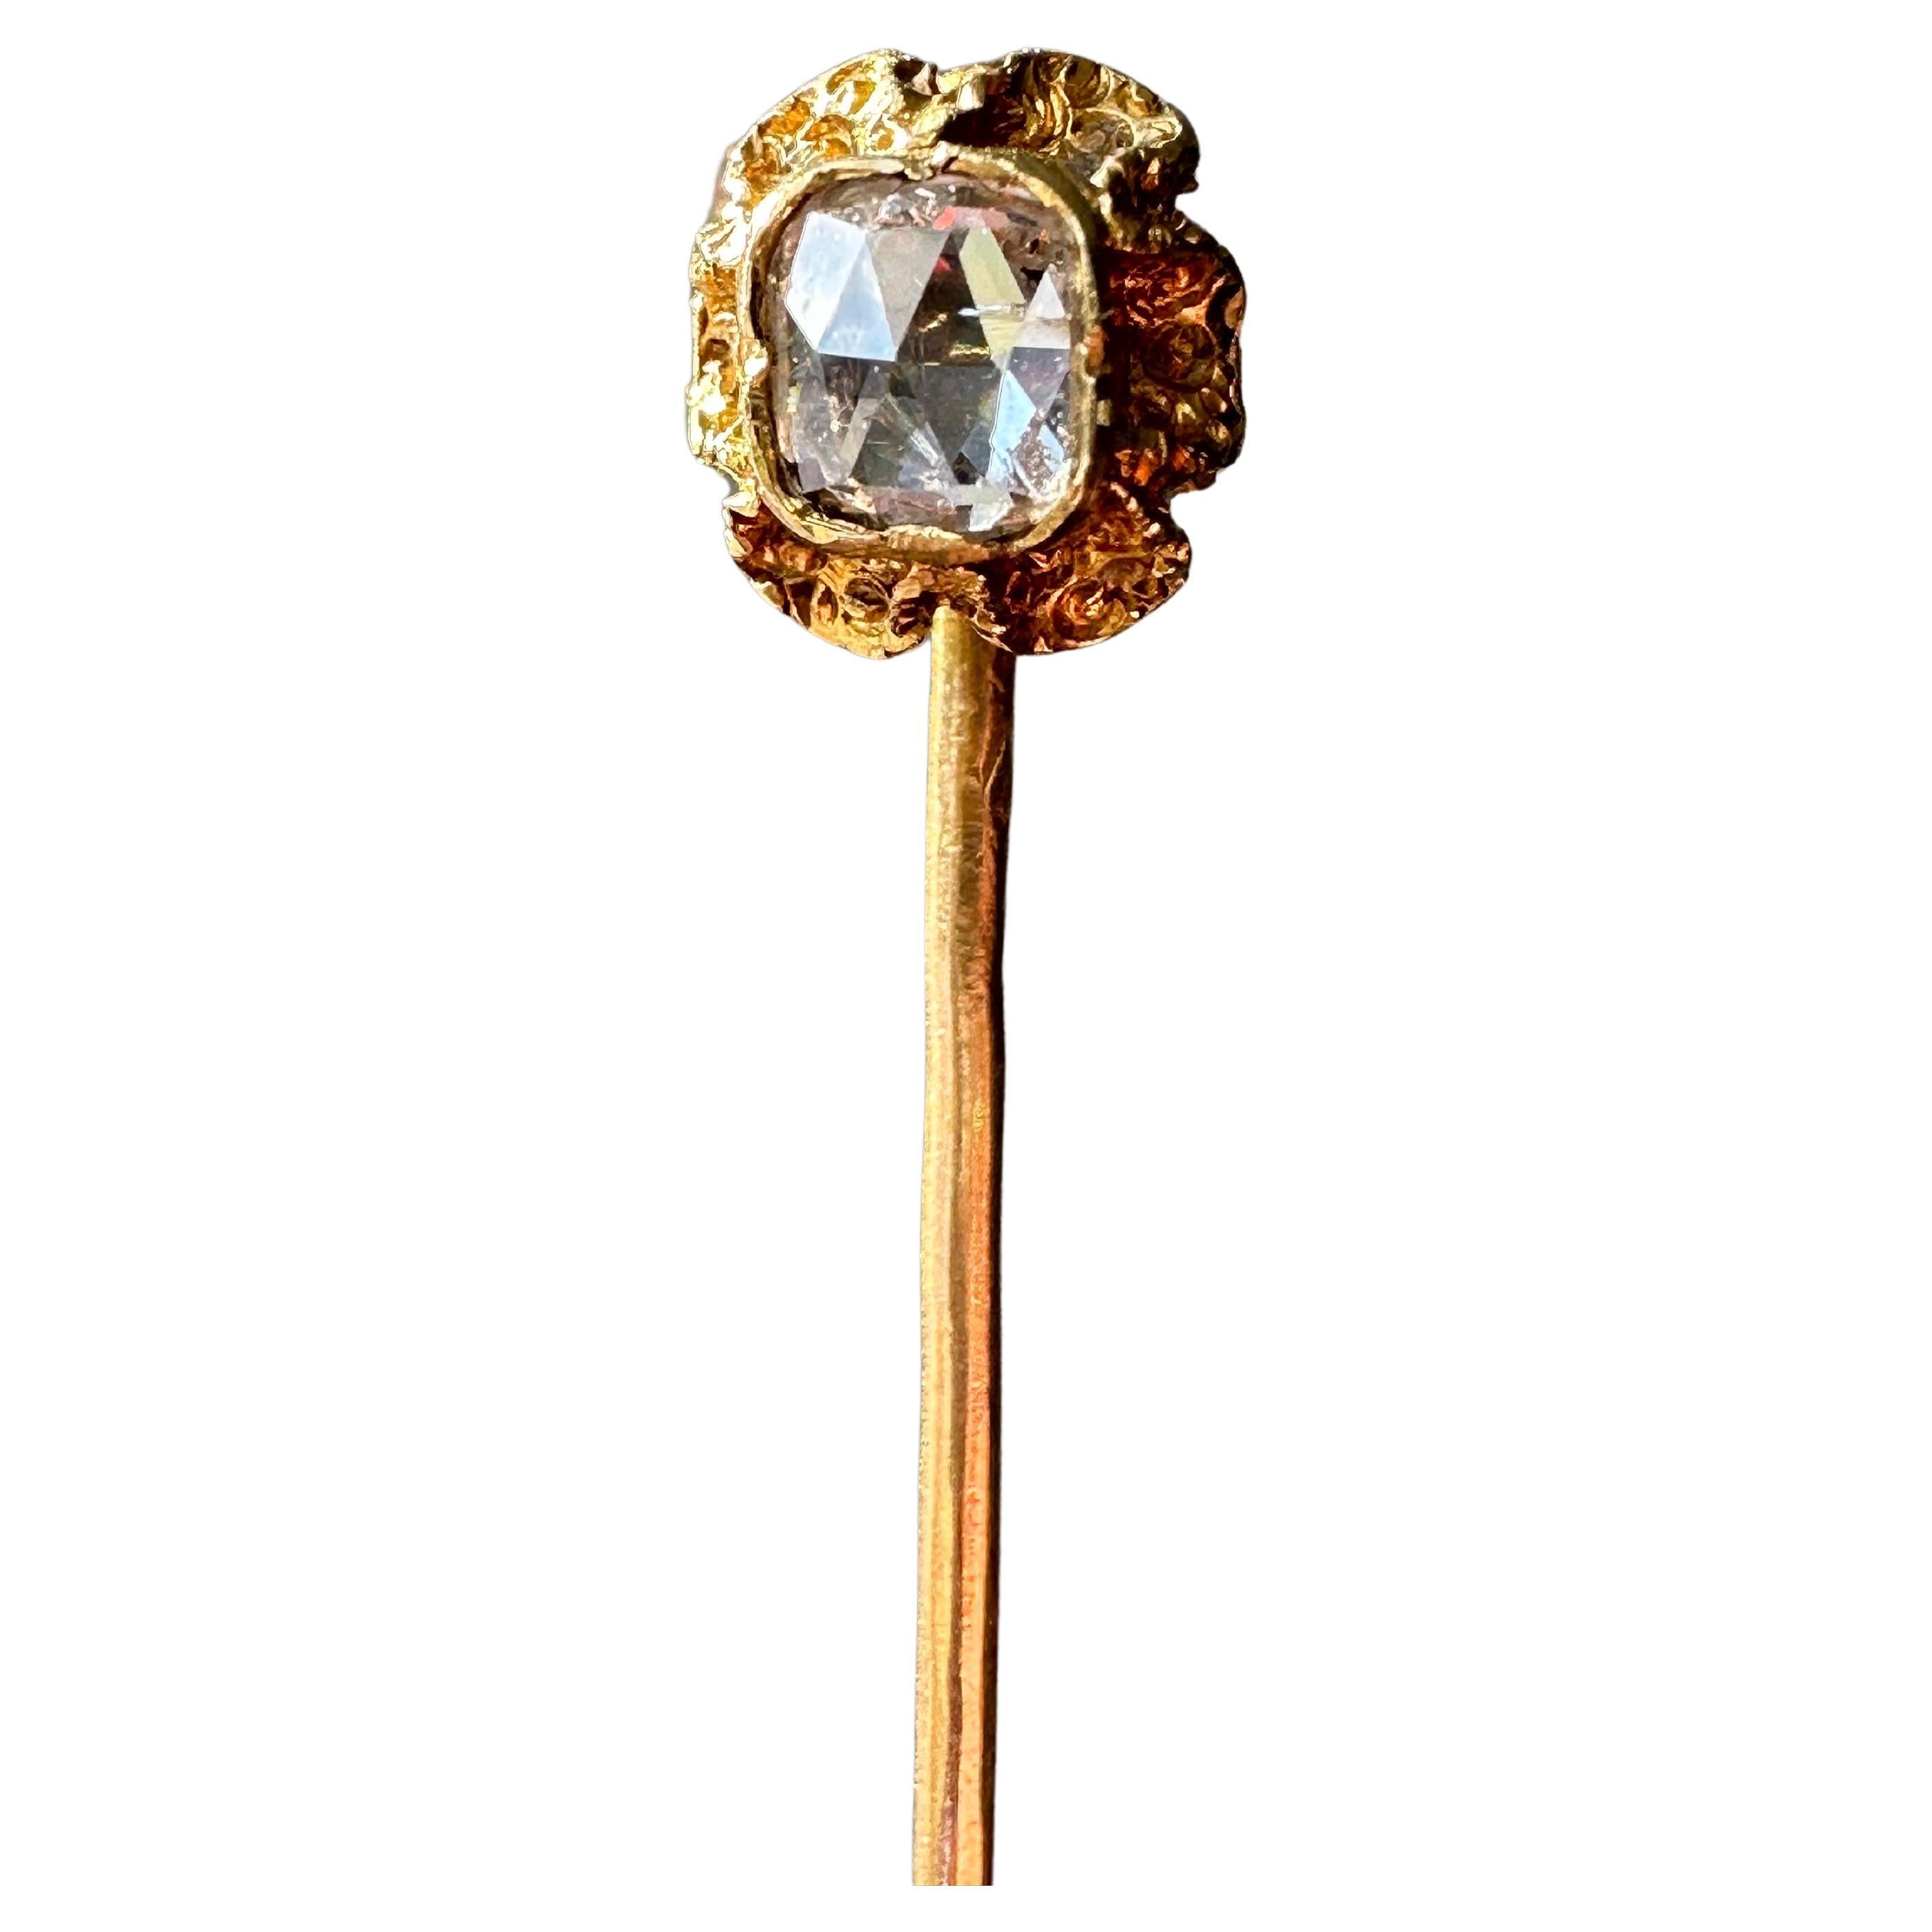 Early 19th Century French Rose Cut Diamond Stick Pin Victor Halphen